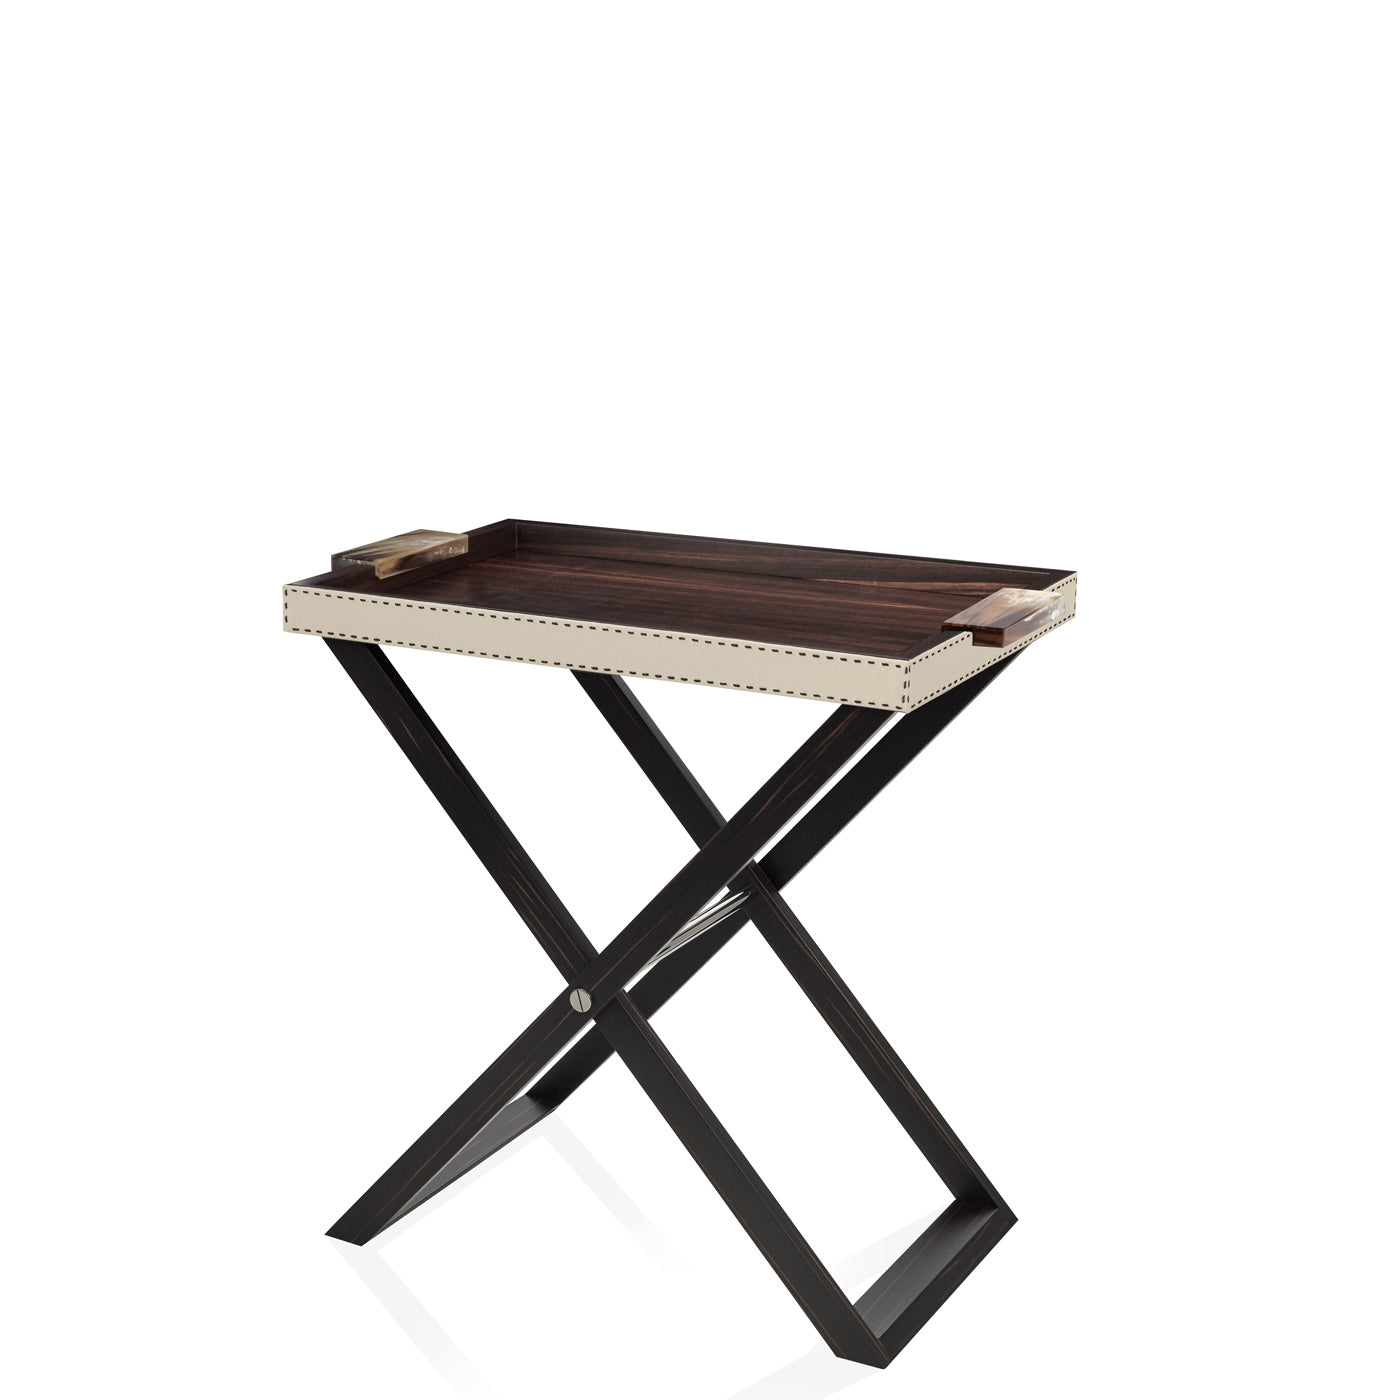 Arcahorn Lipari Butlers Serving Table | Matte Amara Ebony Veneer Tray | Aida Pebbled Leather in Ice Cream with Handmade Dark Brown Stitching | Glossy Horn Handles | Stainless Steel Detailing | Perfect for Yacht or Office Decor | Discover Luxury Home Accessories at 2Jour Concierge, #1 luxury high-end gift & lifestyle shop